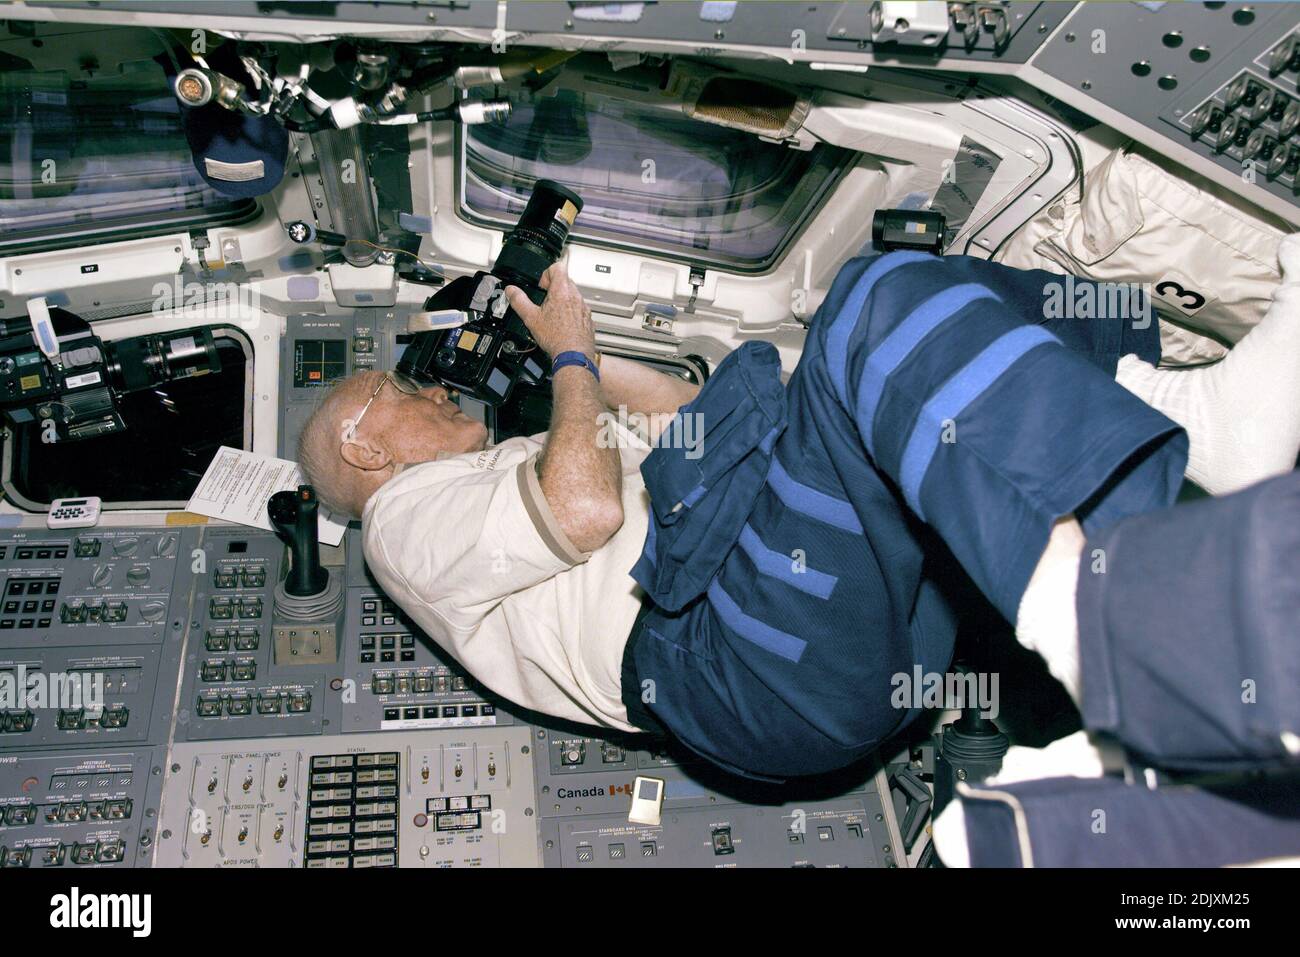 STS-95 Payload Specialist John Glenn positions himself to take photos from the Discovery's aft flight deck windows on Flight Day 3. Please note: Fees charged by the agency are for the agency 2019 ;s services only, and do not, nor are they intended to, convey to the user any ownership of Copyright or License in the material. The agency does not claim any ownership including but not limited to Copyright or License in the attached material. By publishing this material you expressly agree to indemnify and to hold the agency and its directors, shareholders and employees harmless from any loss, clai Stock Photo